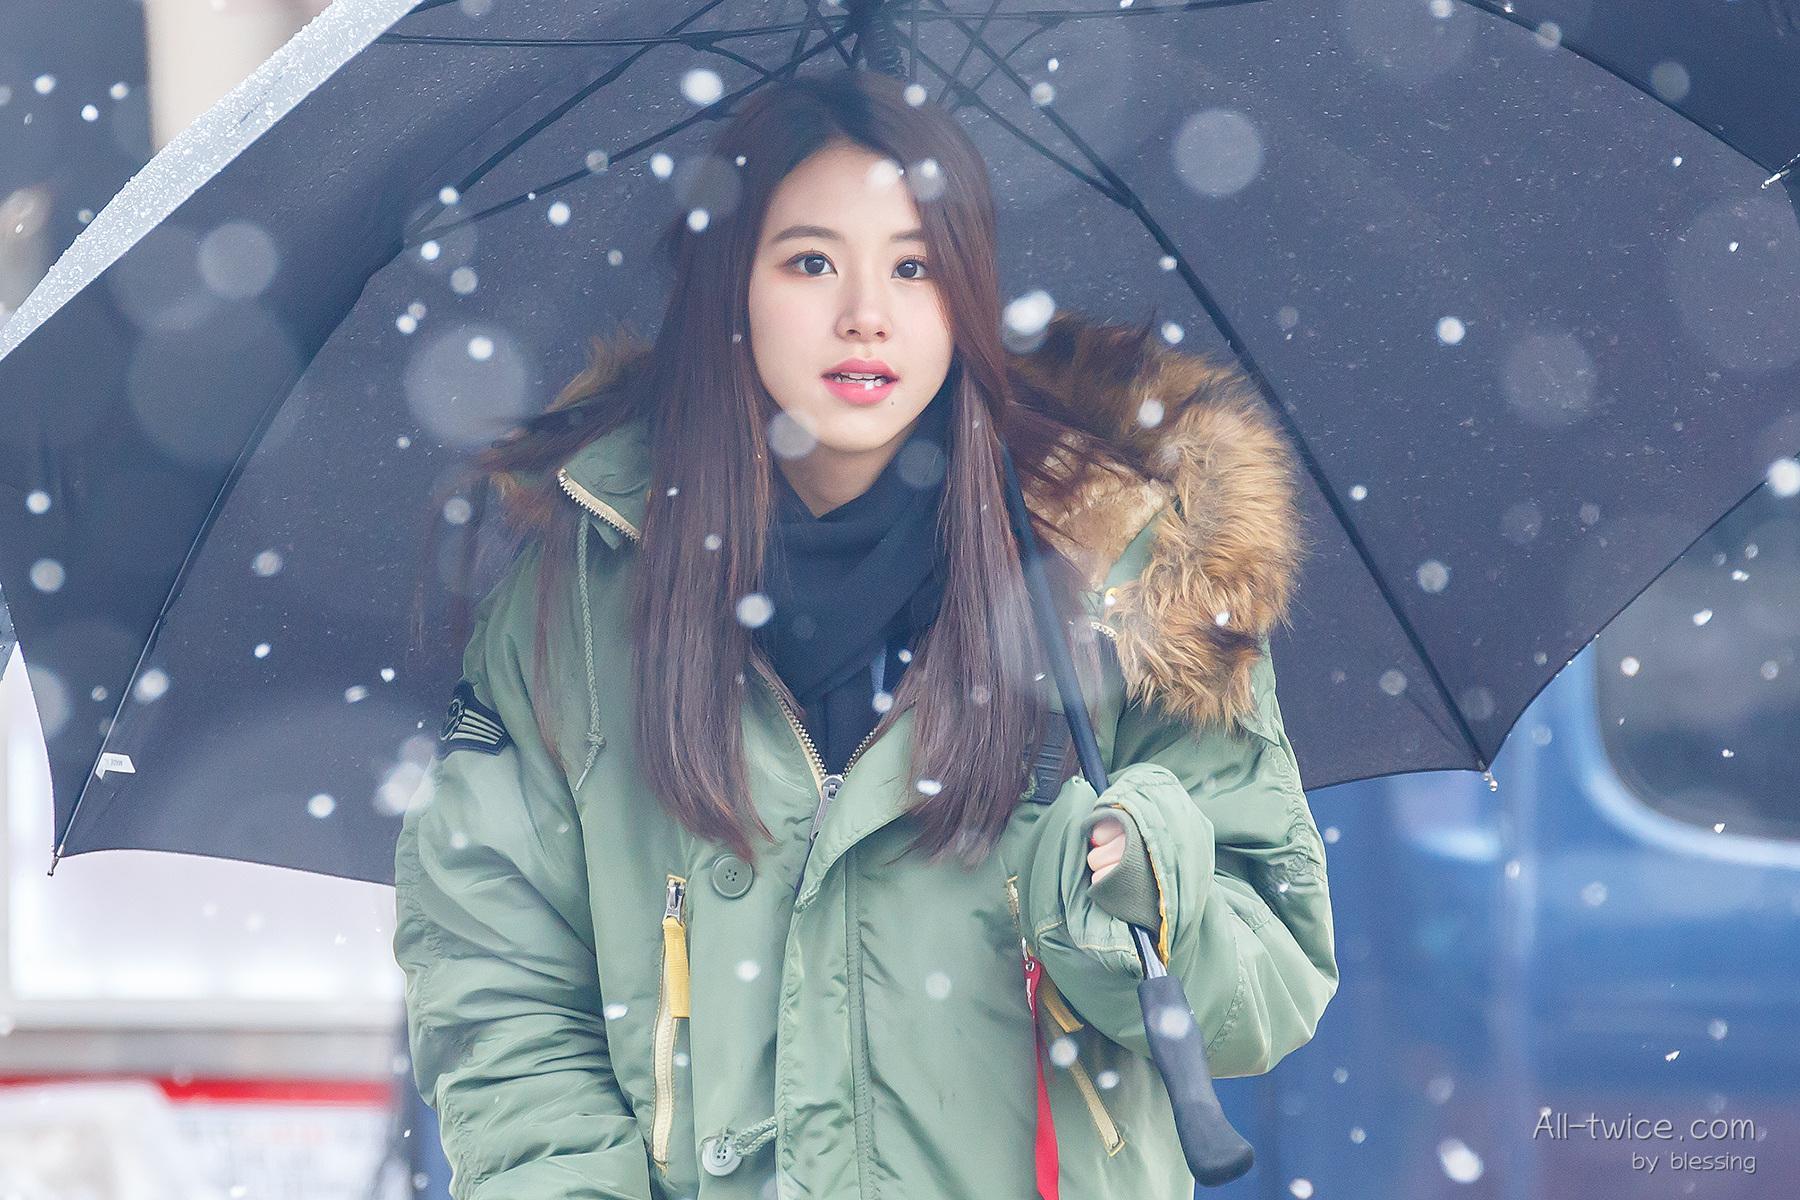 Snowy Chaeyoung